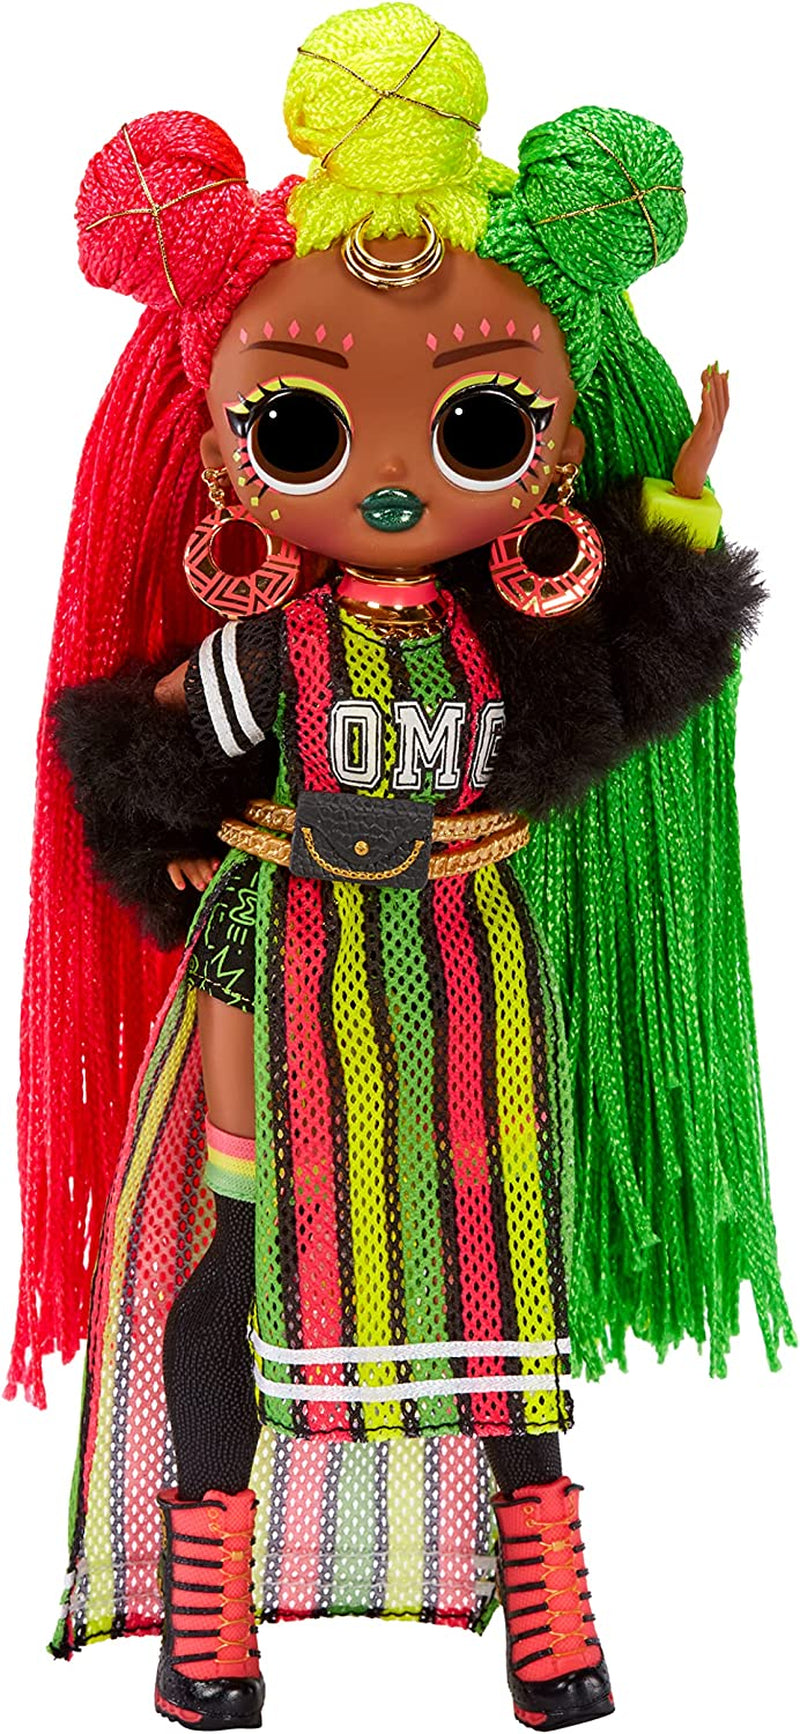 LOL Surprise OMG Queens Sways Fashion Doll with 20 Surprises Including Outfit and Accessories for Fashion Toy Girls Ages 3 and Up, 10-Inch Doll Sporting Goods > Outdoor Recreation > Winter Sports & Activities MGA Entertainment   